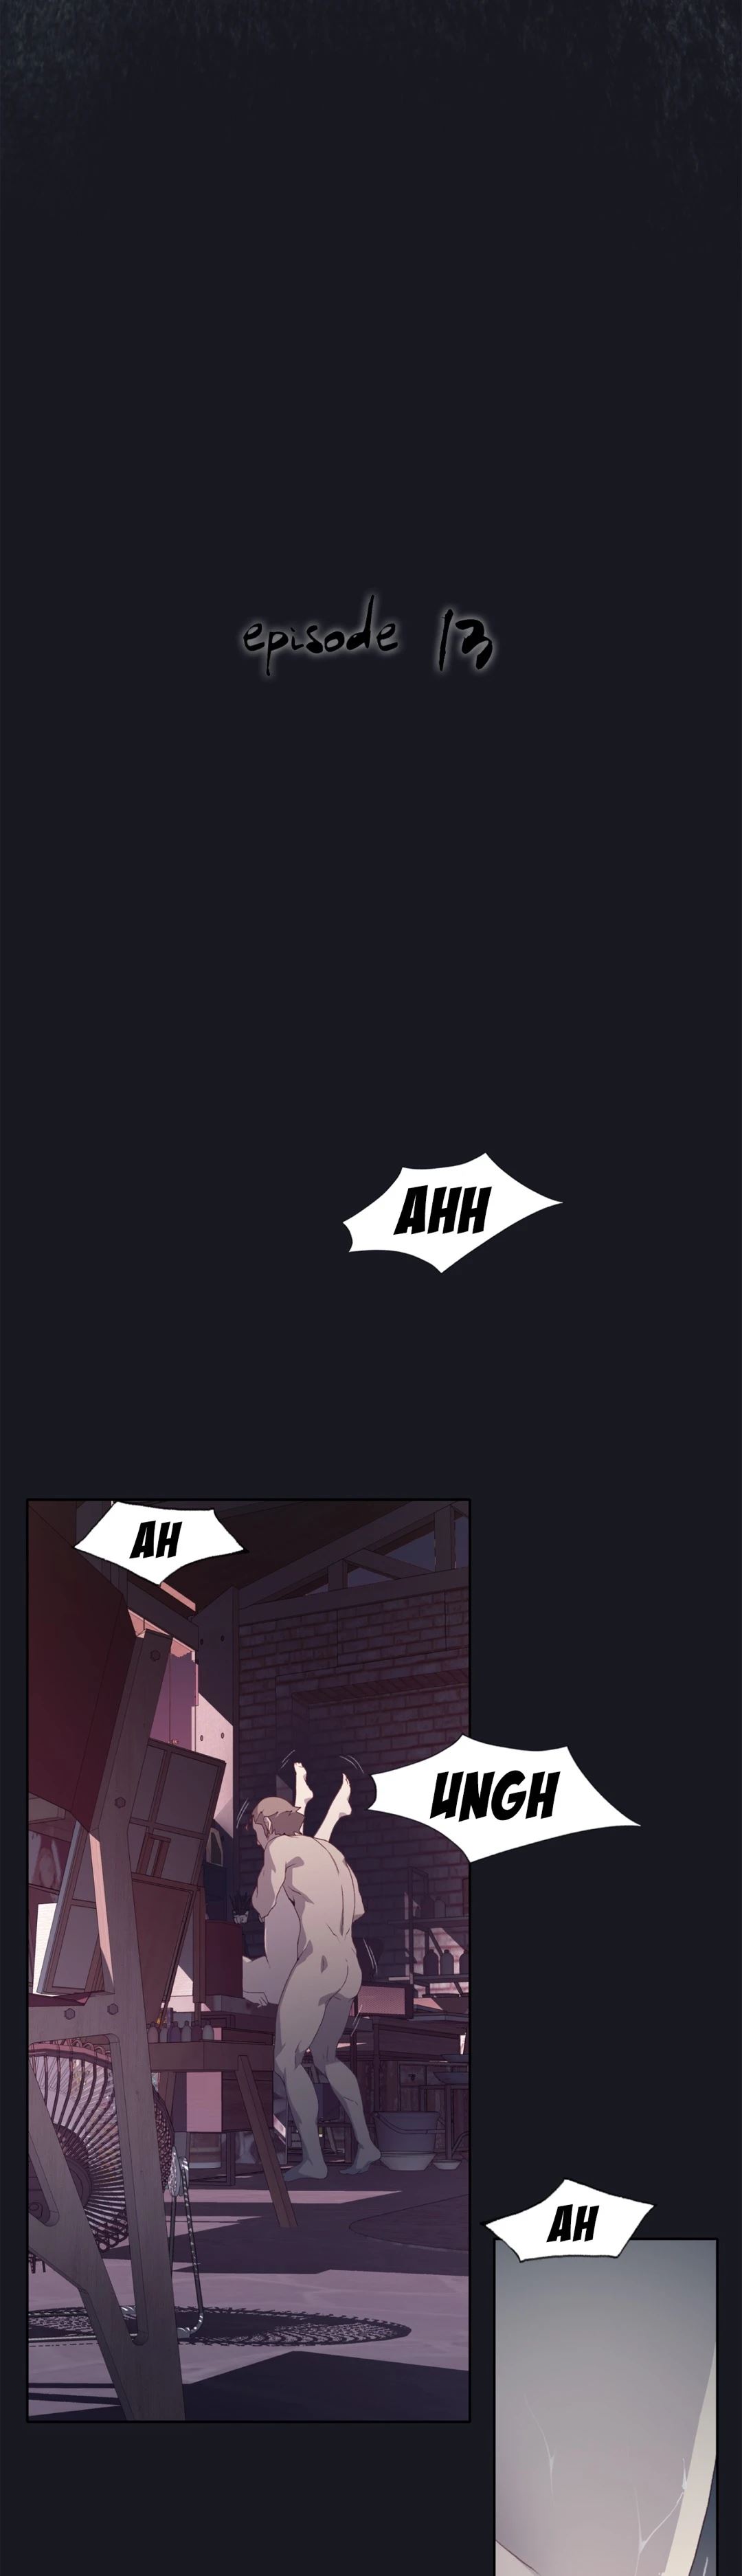 Blood on the wall - Chapter 13 Page 6